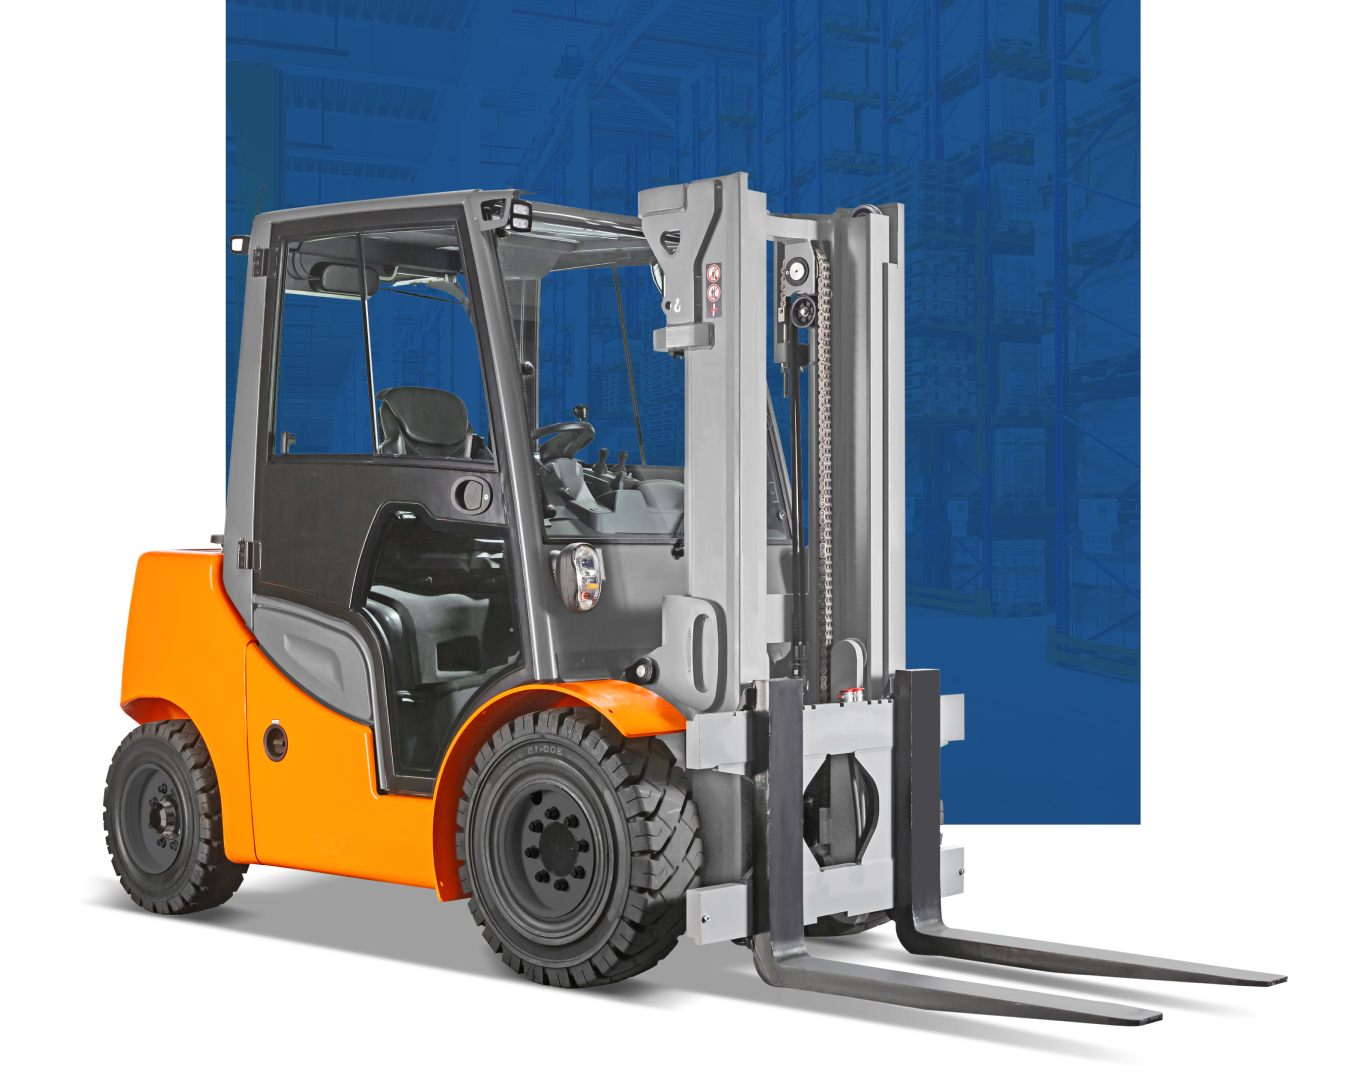 General Forklift Certification  Requirements